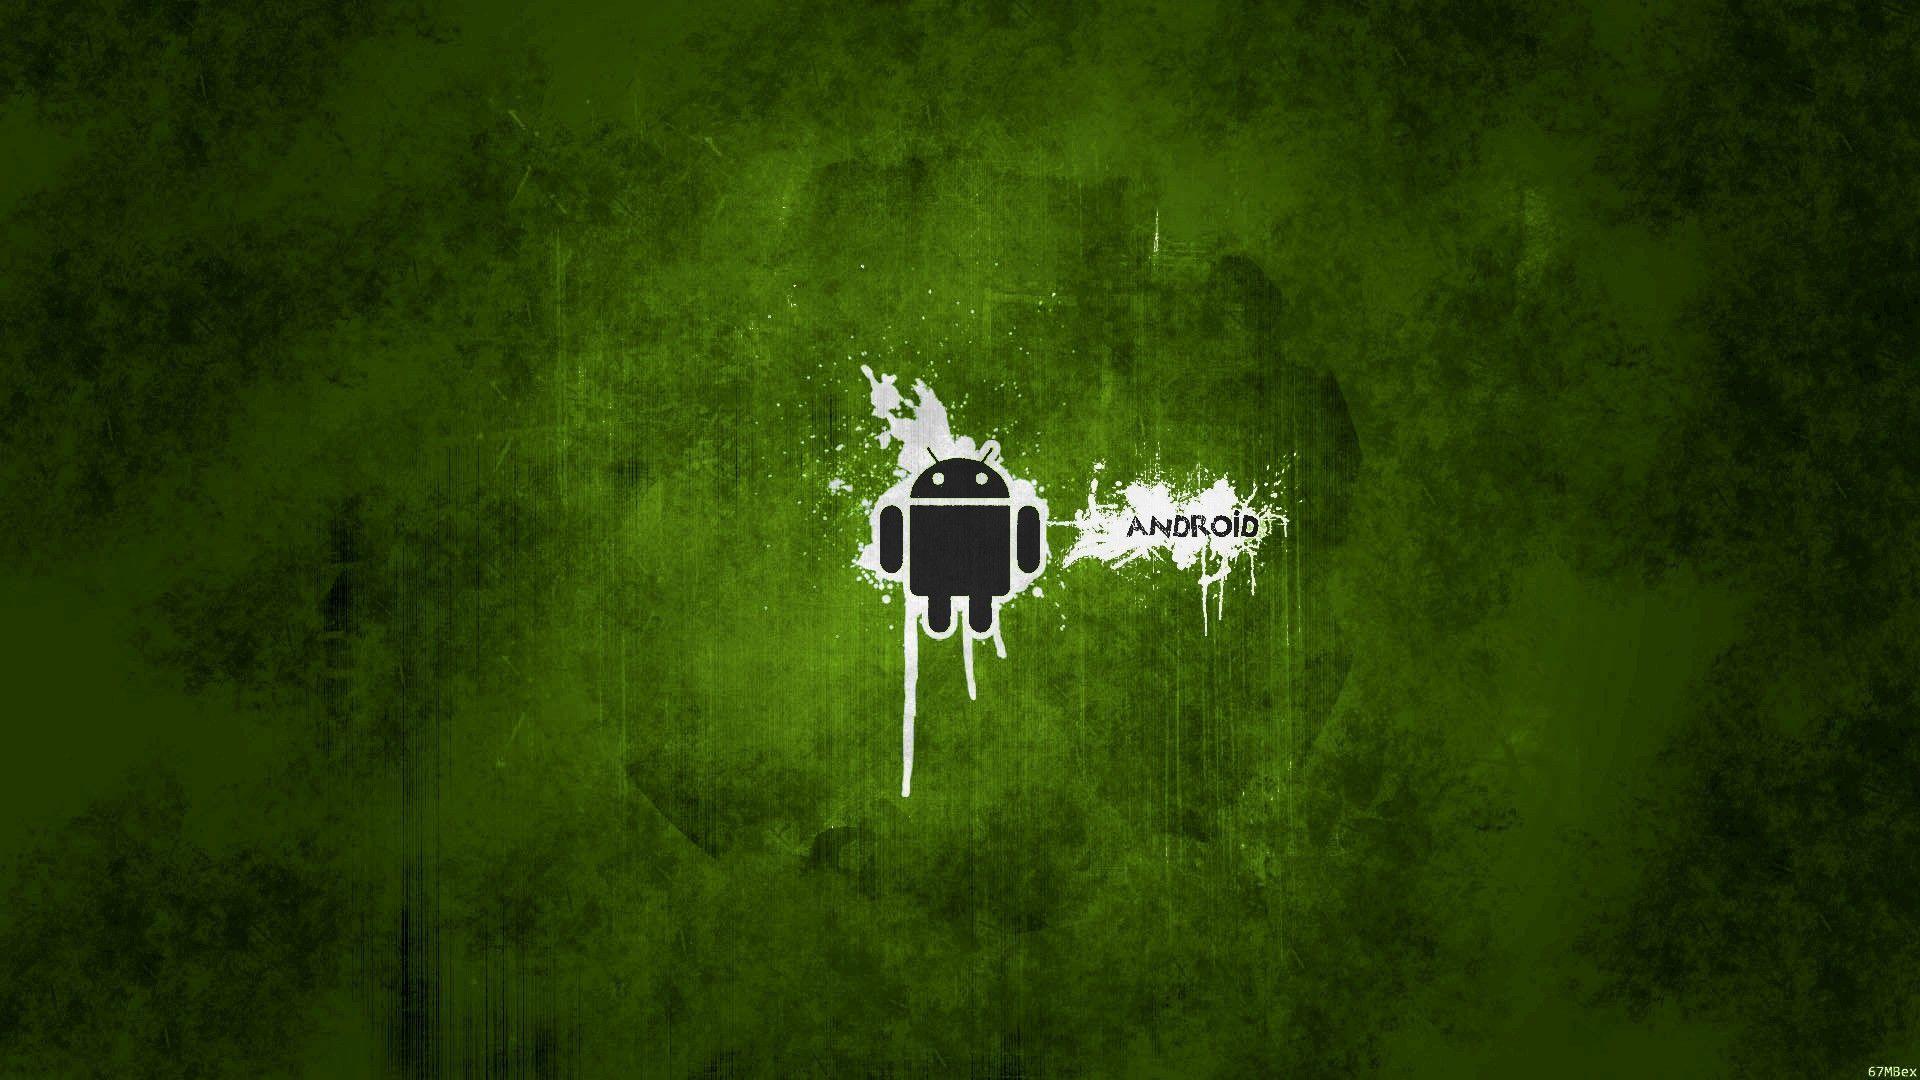 Mind Blowing Android Logo Free Desktop HD Wallpaper 1920x1200PX